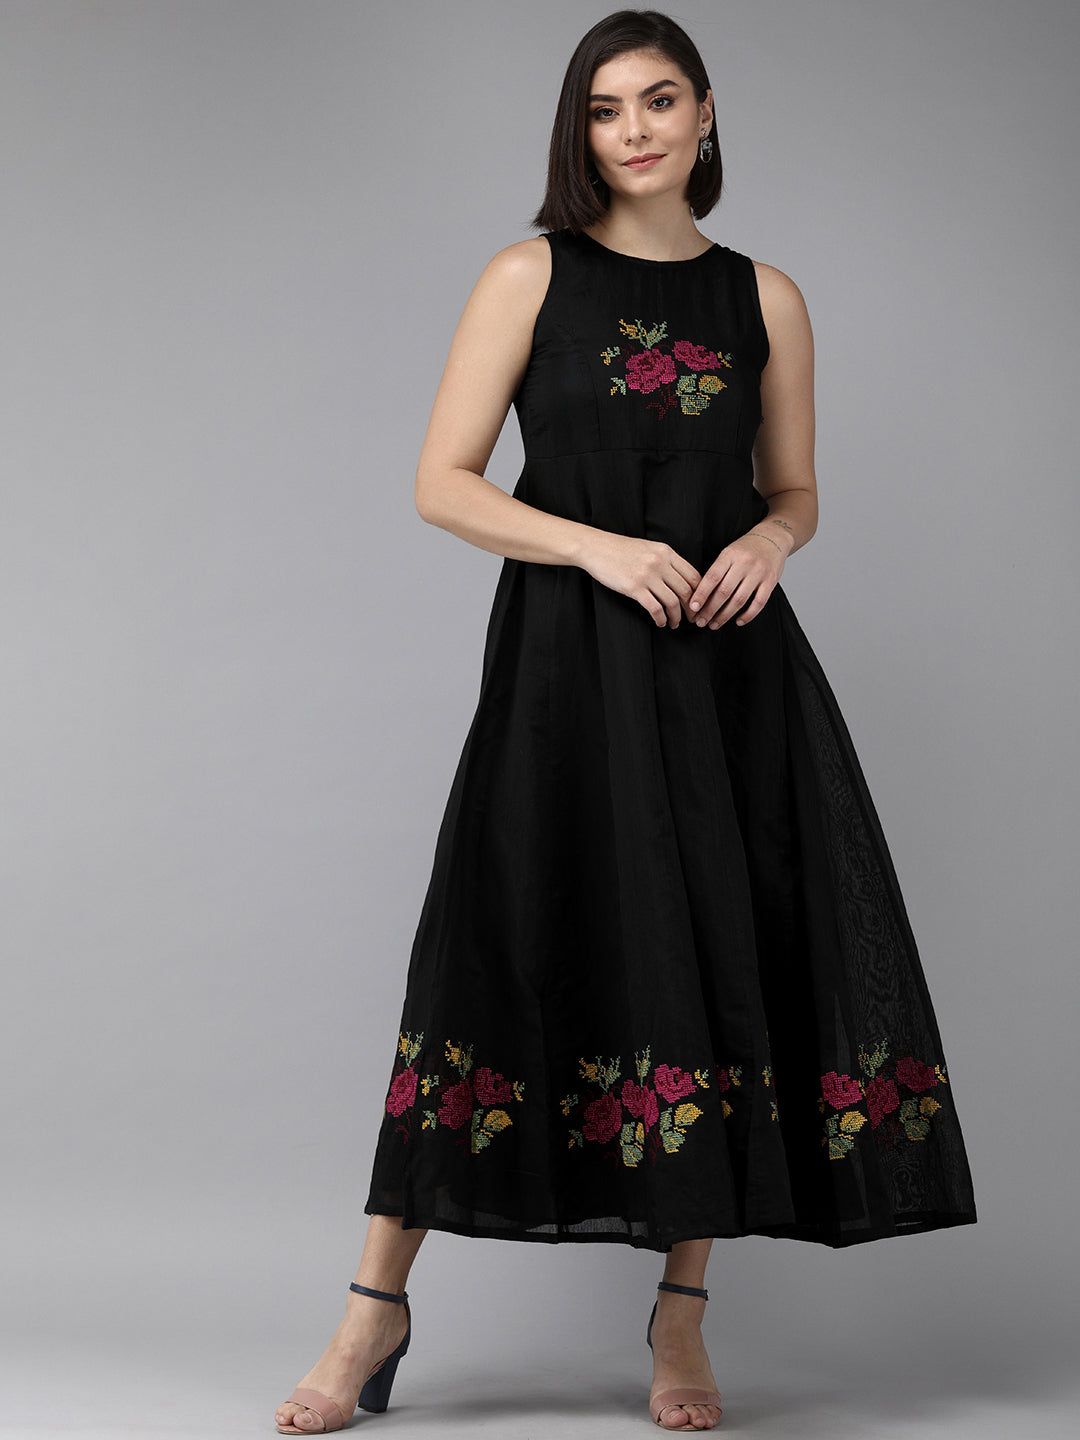 Bhama Couture Black Embroidered Chanderi Silk Maxi Dress